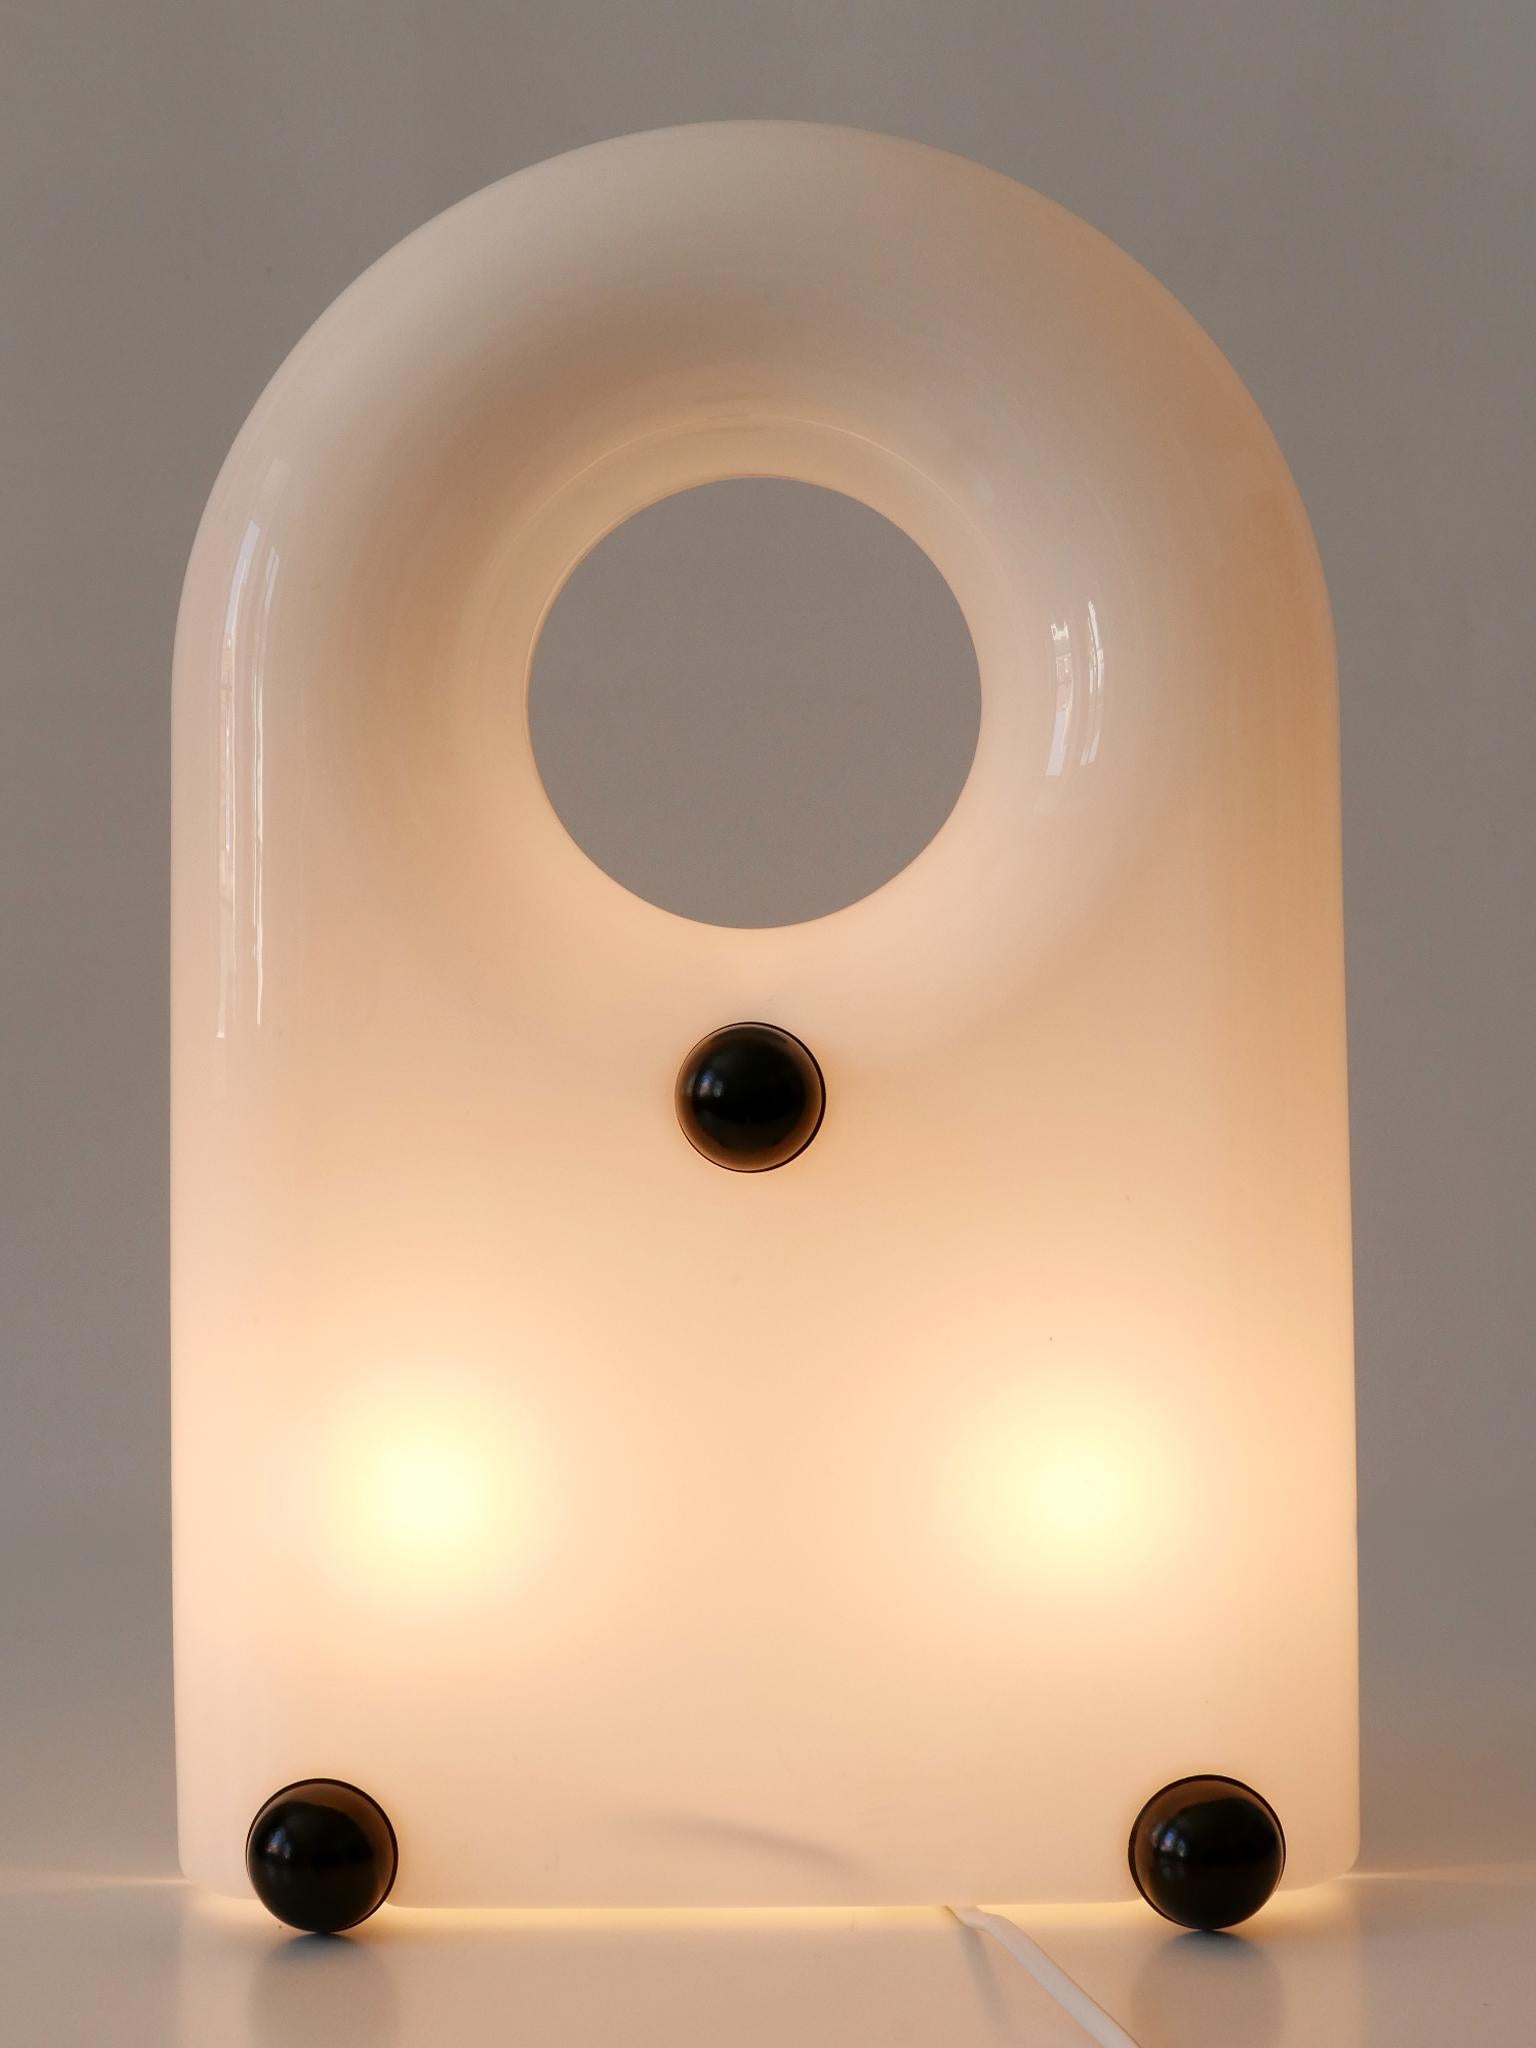 Extremely Rare Lucite Table Lamp or Floor Light by Elio Martinelli 1969 Italy For Sale 10